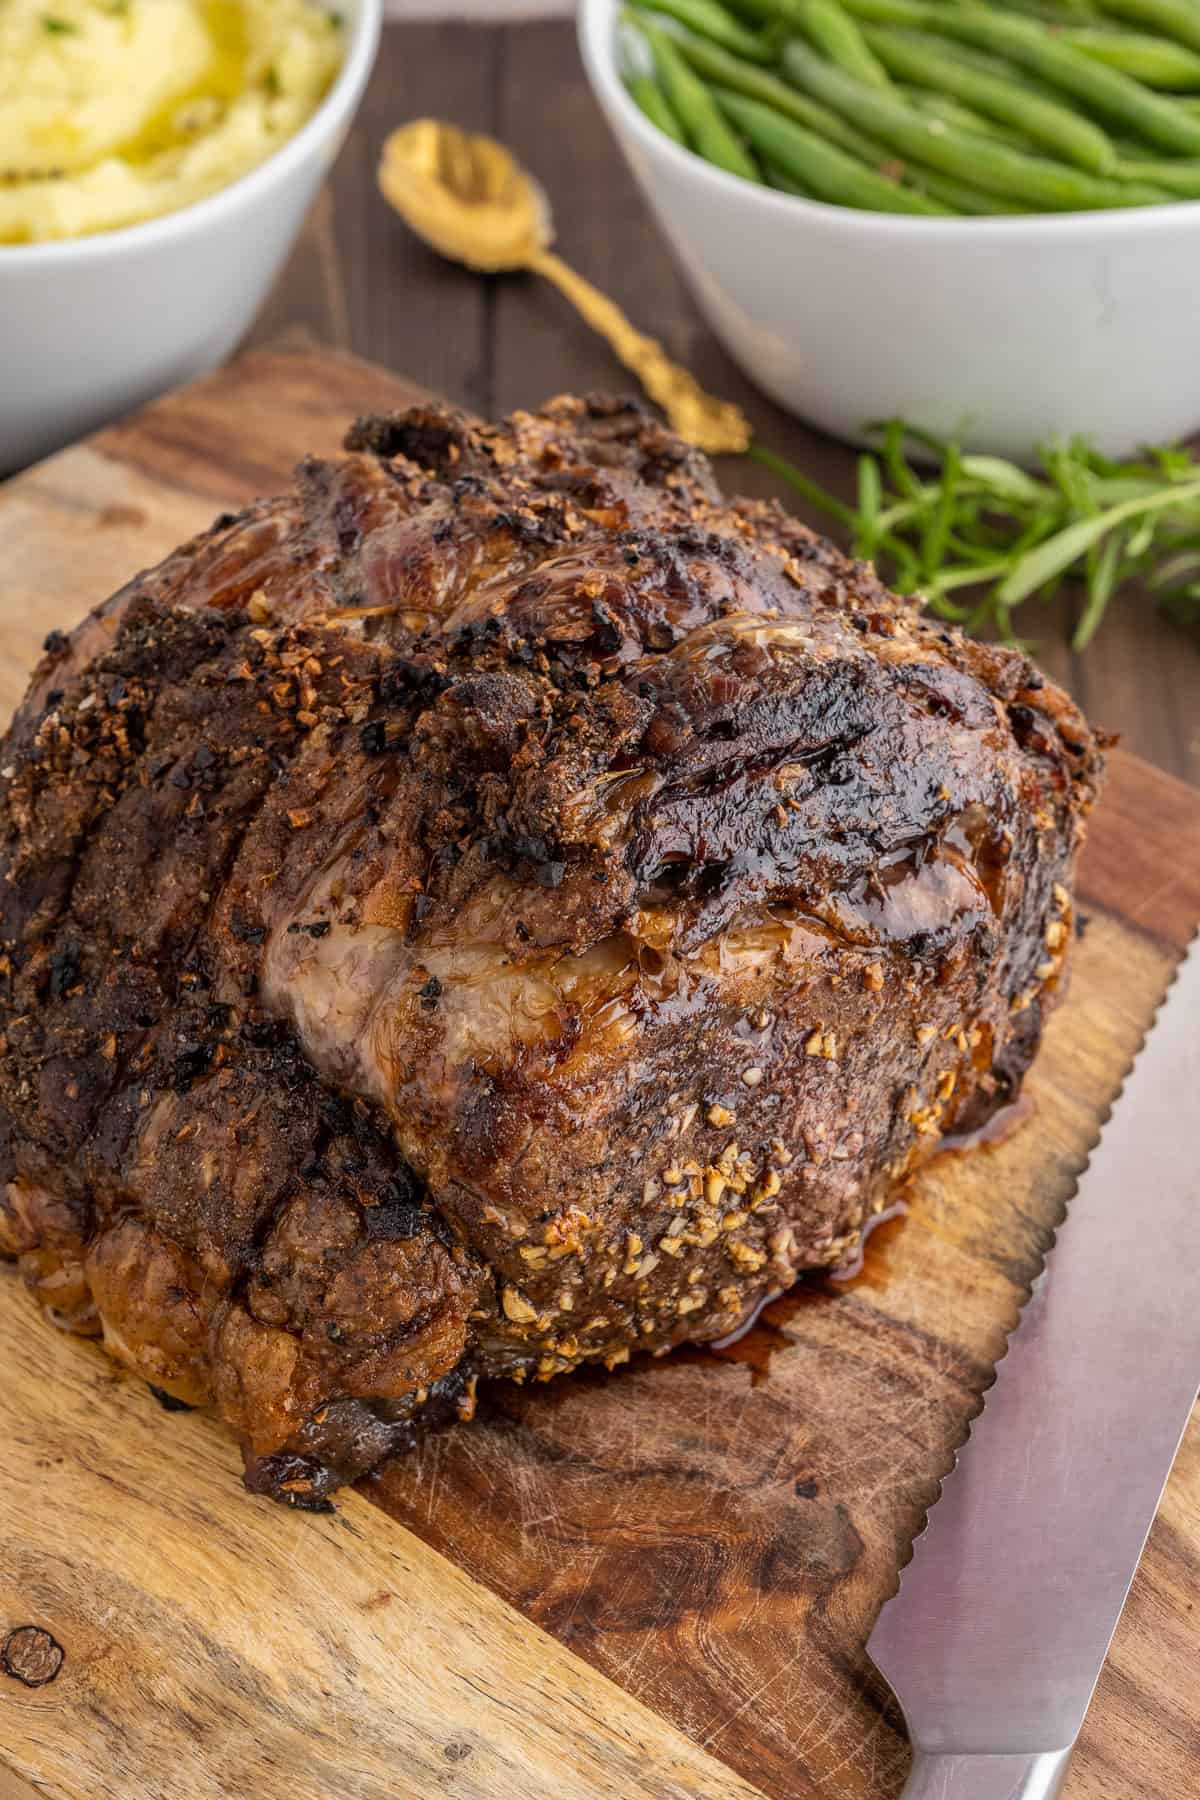 A perfectly cooked prime rib resting on a cutting board.